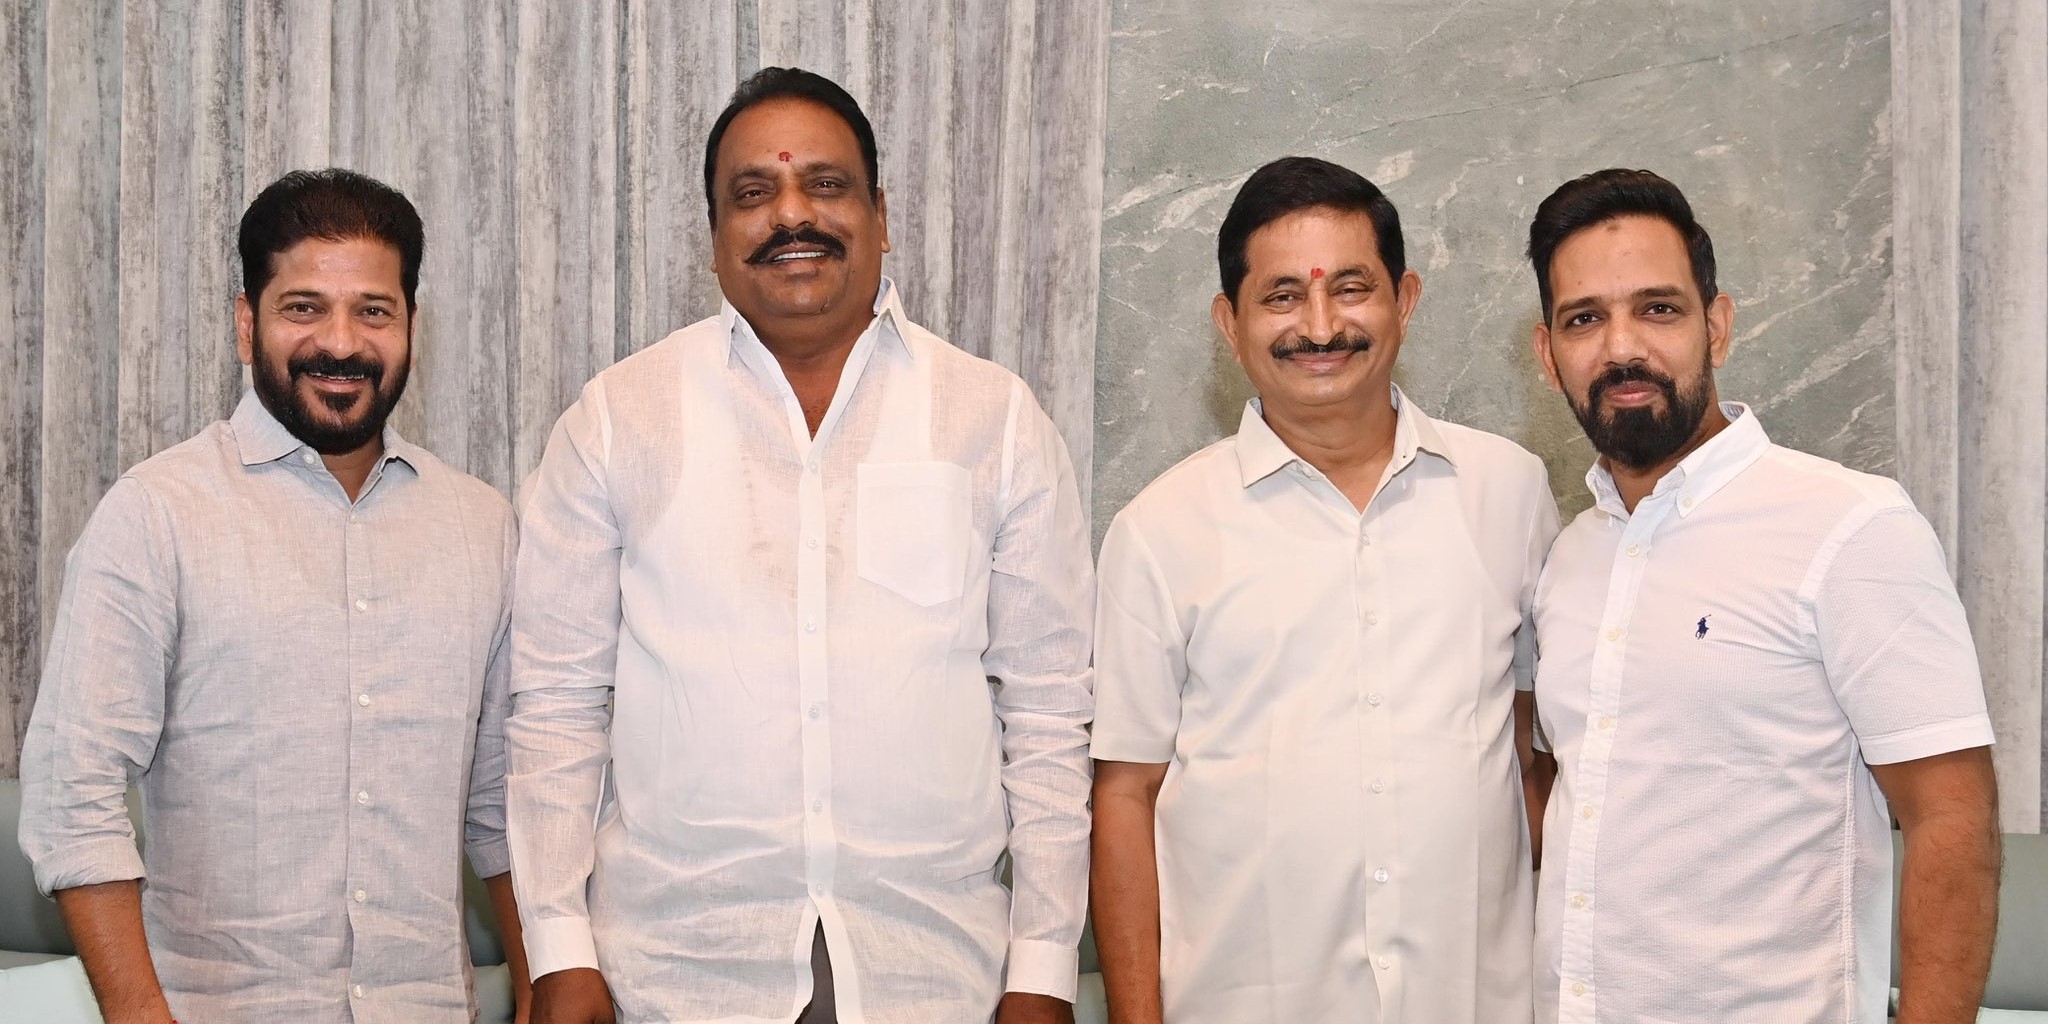 BRS Rajendranagar MLA Prakash Goud calls on Telangana CM Revanth Reddy, in a prelude to joining the Congress